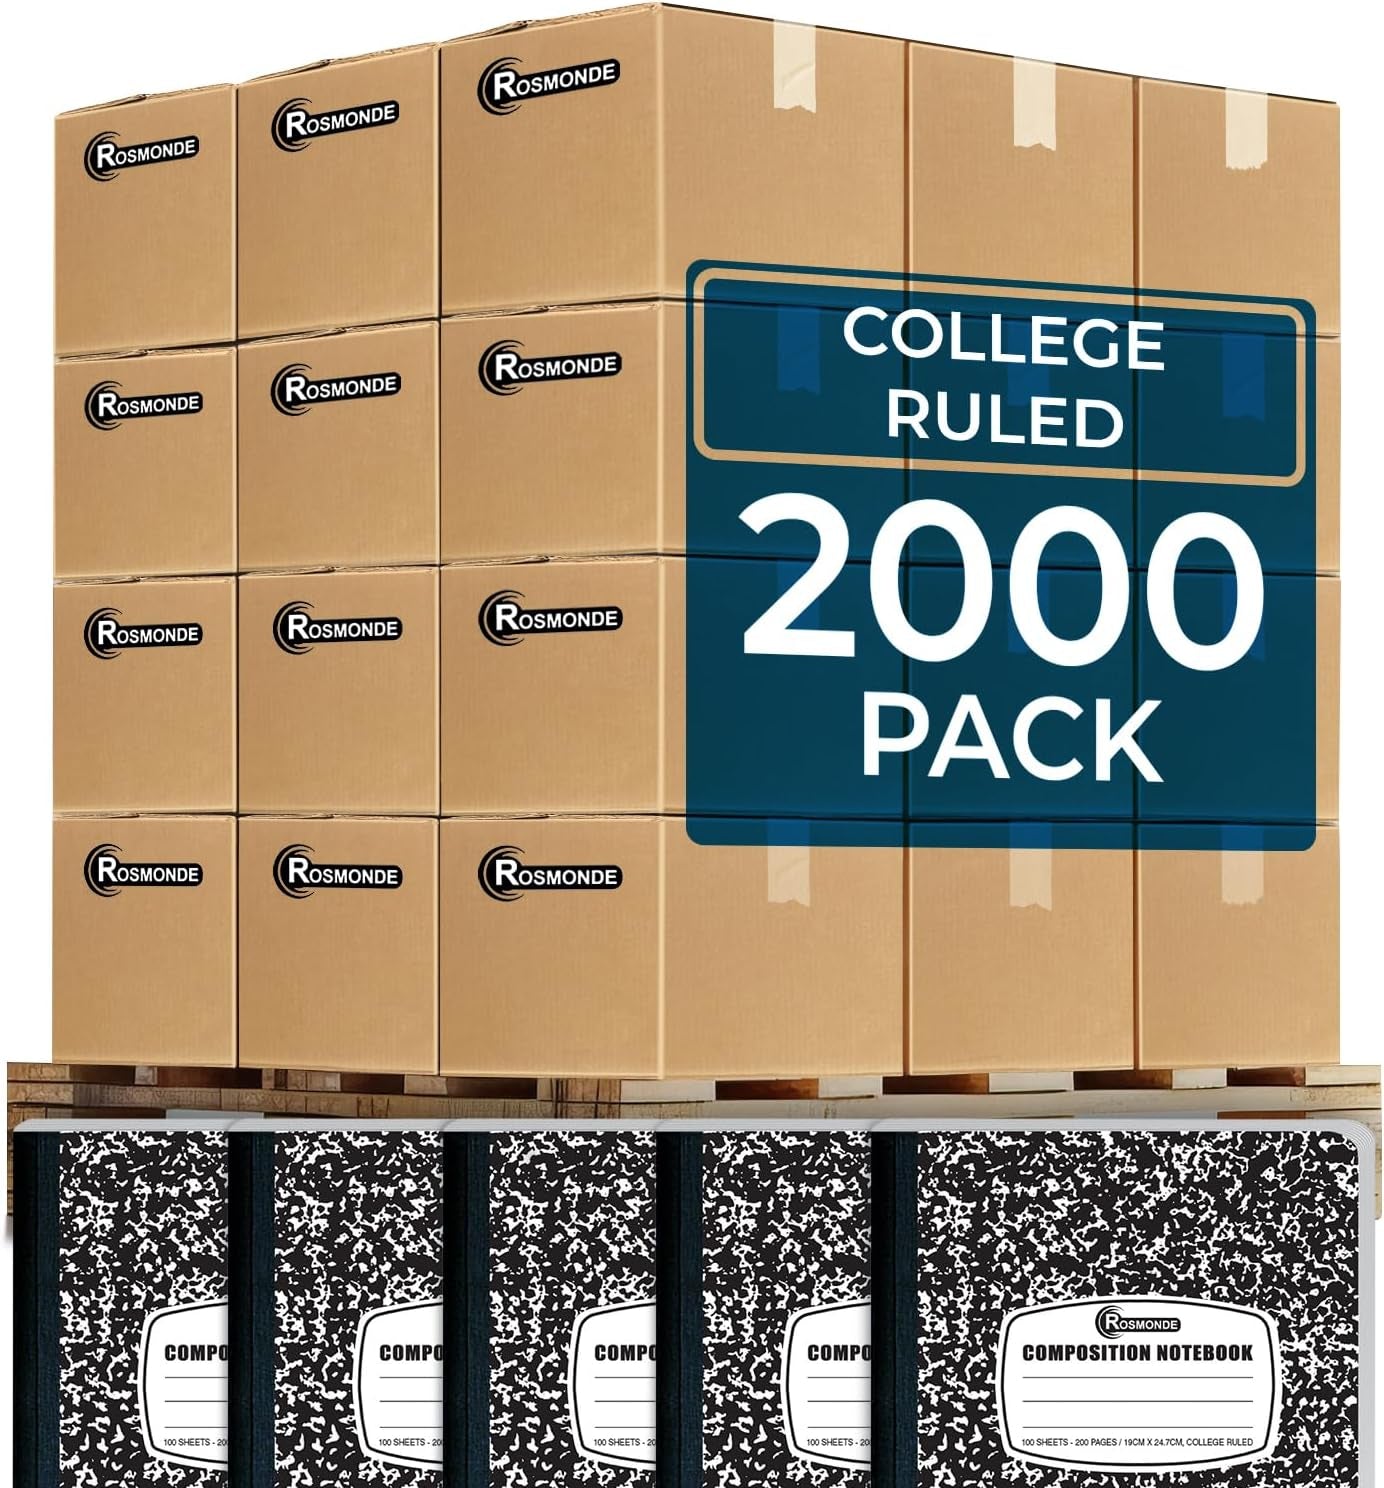 College Ruled Composition Notebooks 5 Pack, 200 Pages (100 Sheets), 9-3/4" X 7-1/2", White & Black Marble Composition Book, Hard Cover, Sturdy Sewn Binding, School, College & Office Supplies